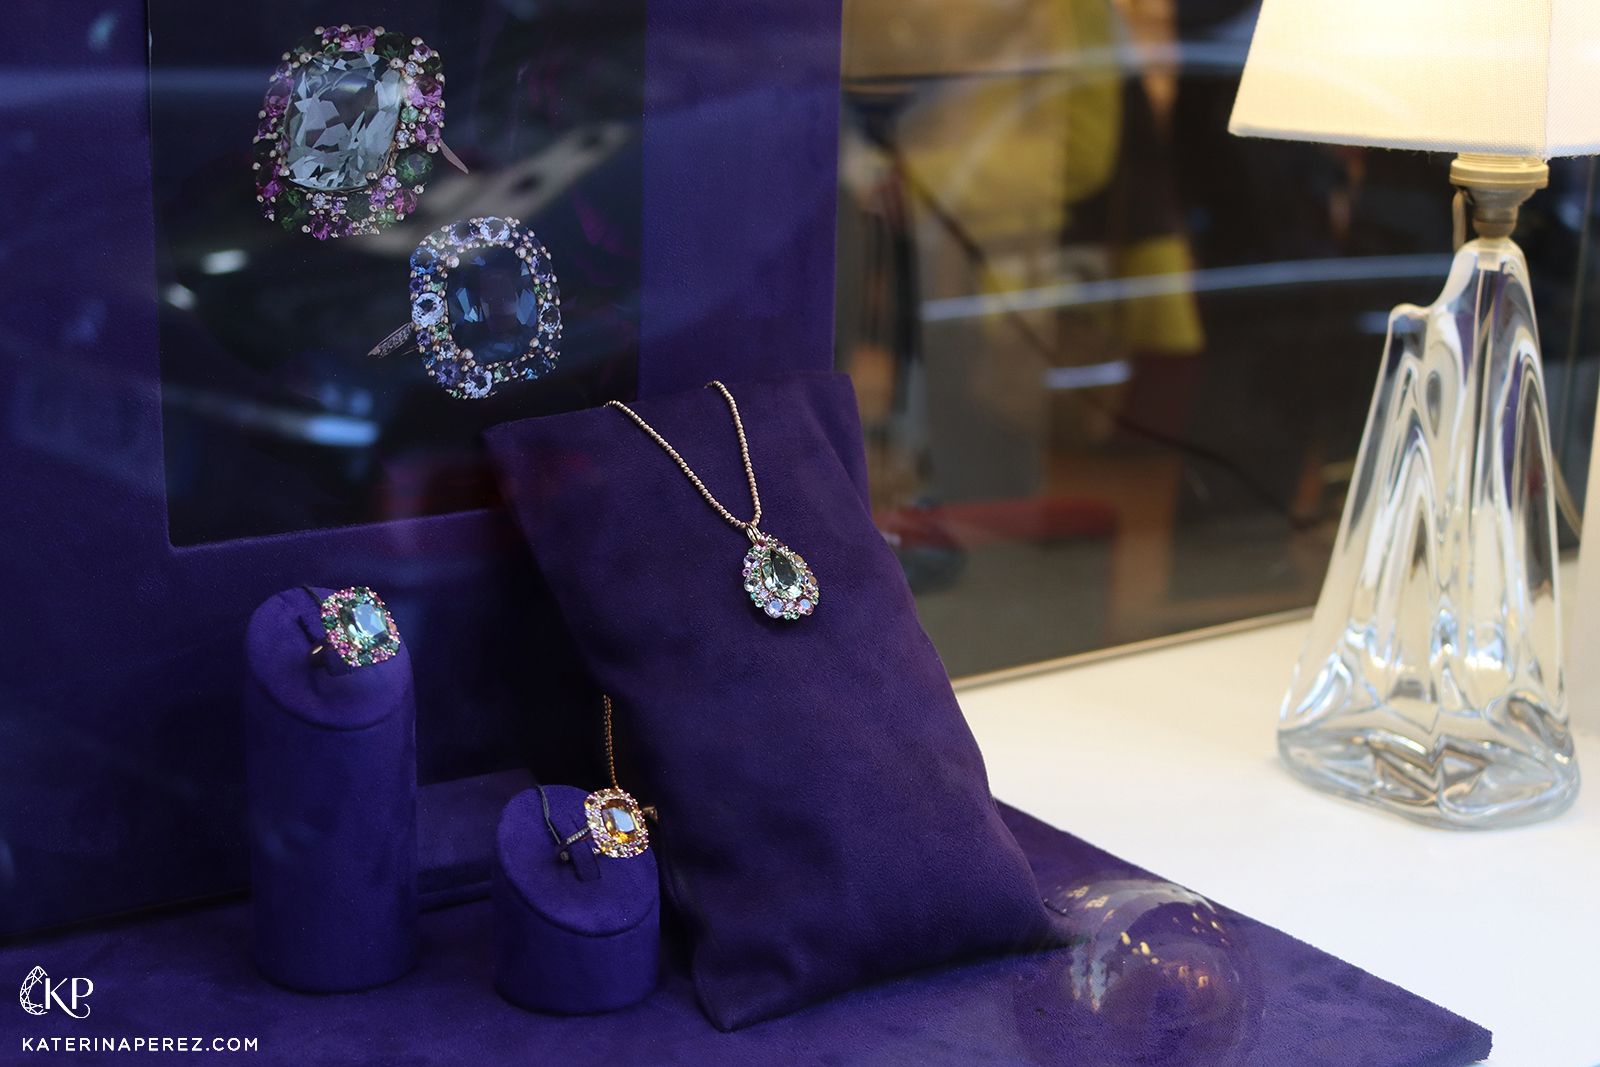 Display cases of coloured gemstone jewellery at the new Isabelle Langlois boutique in Paris